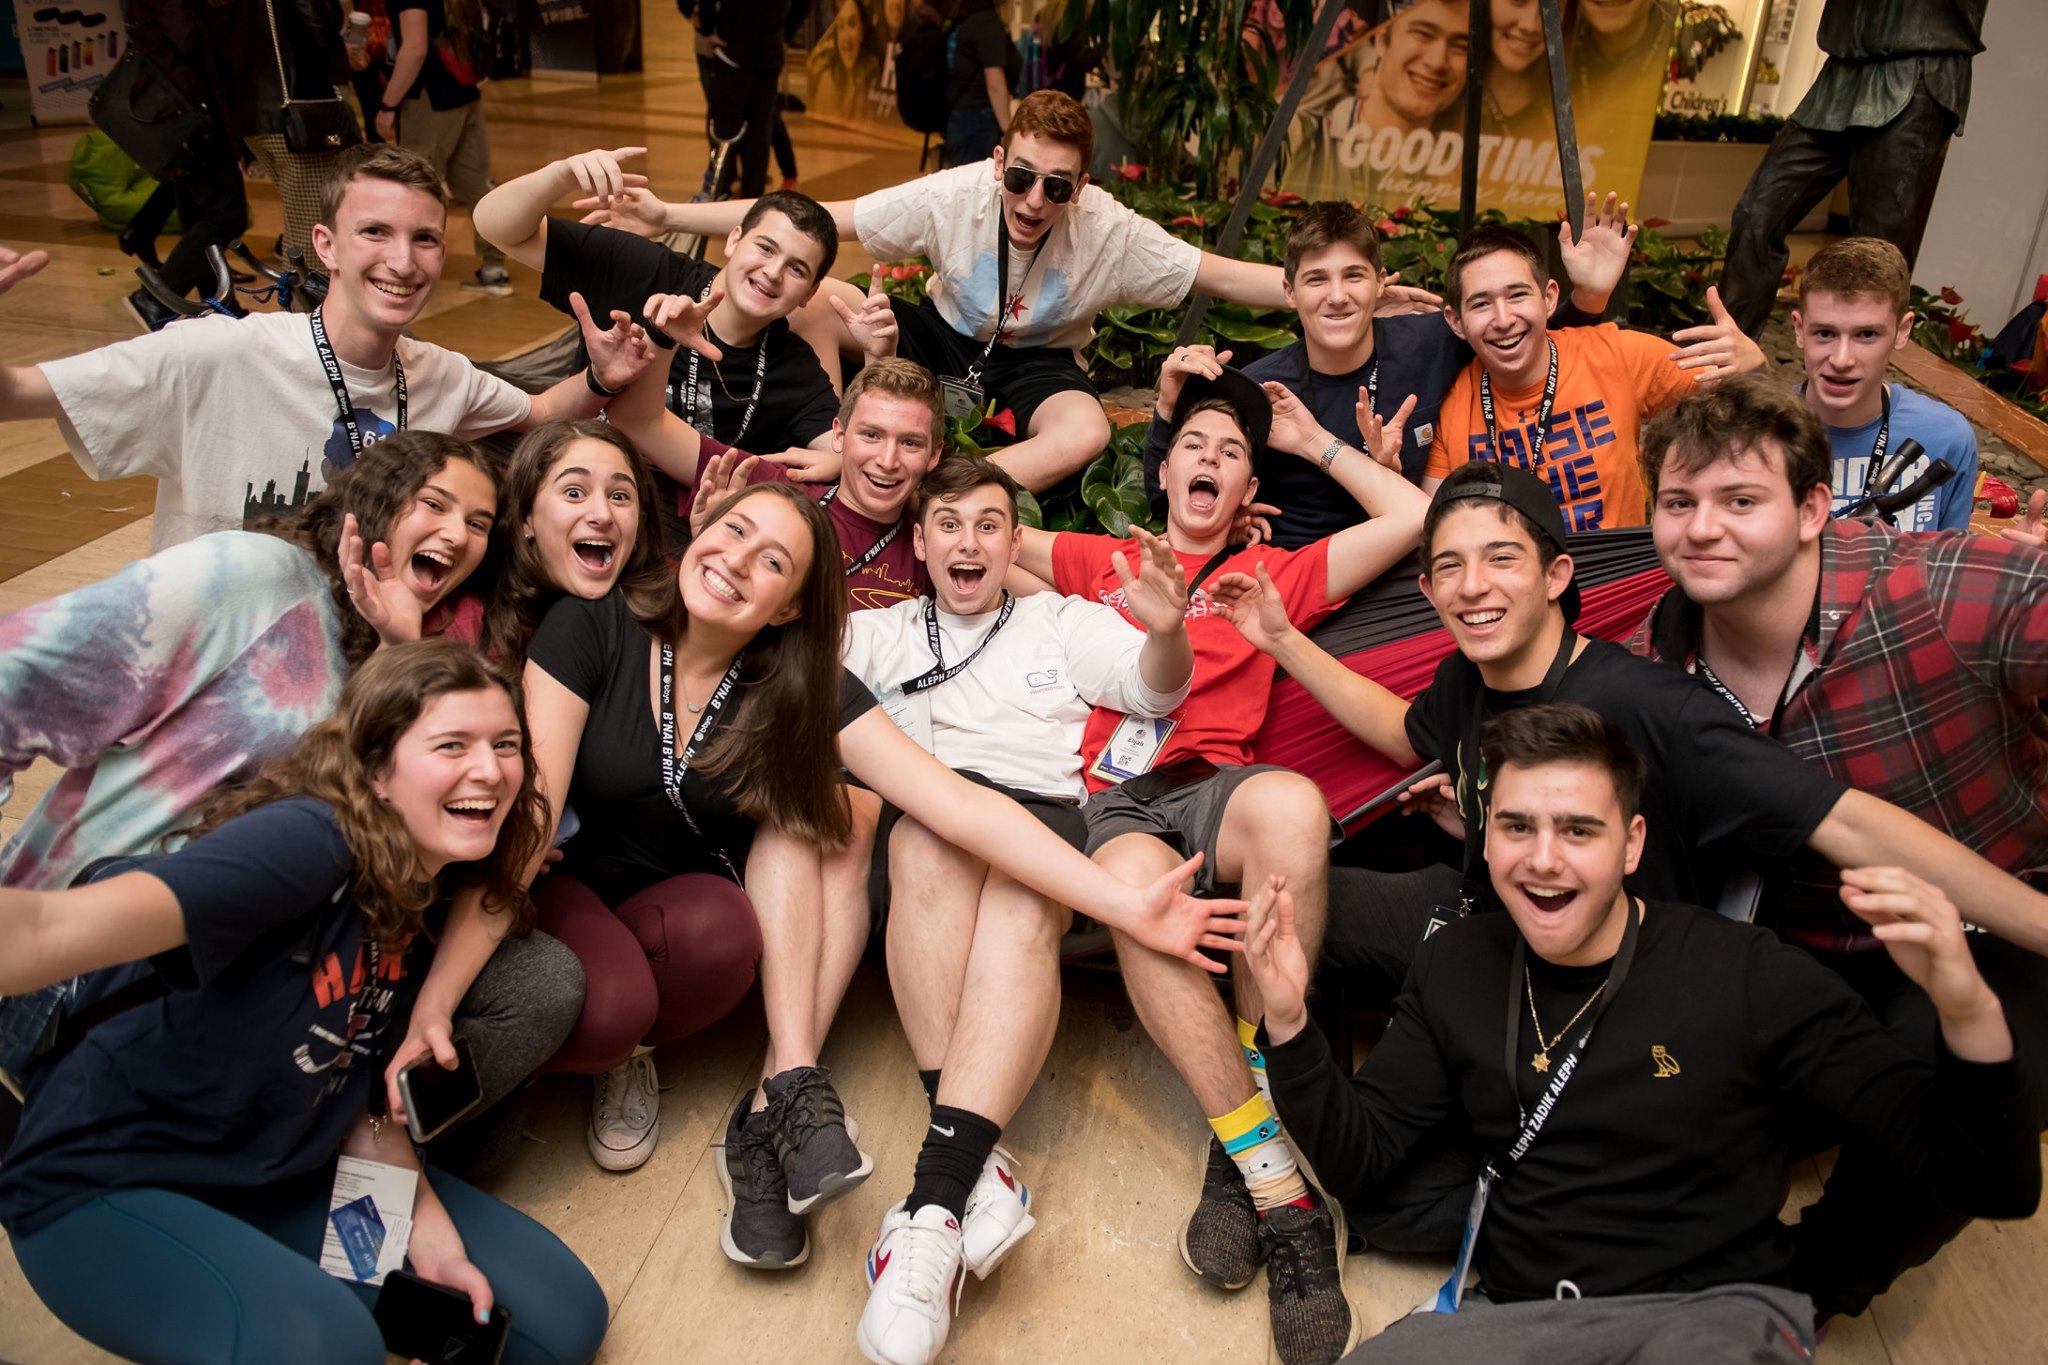 For the 3,500 teens at the annual BBYO convention, the world needs